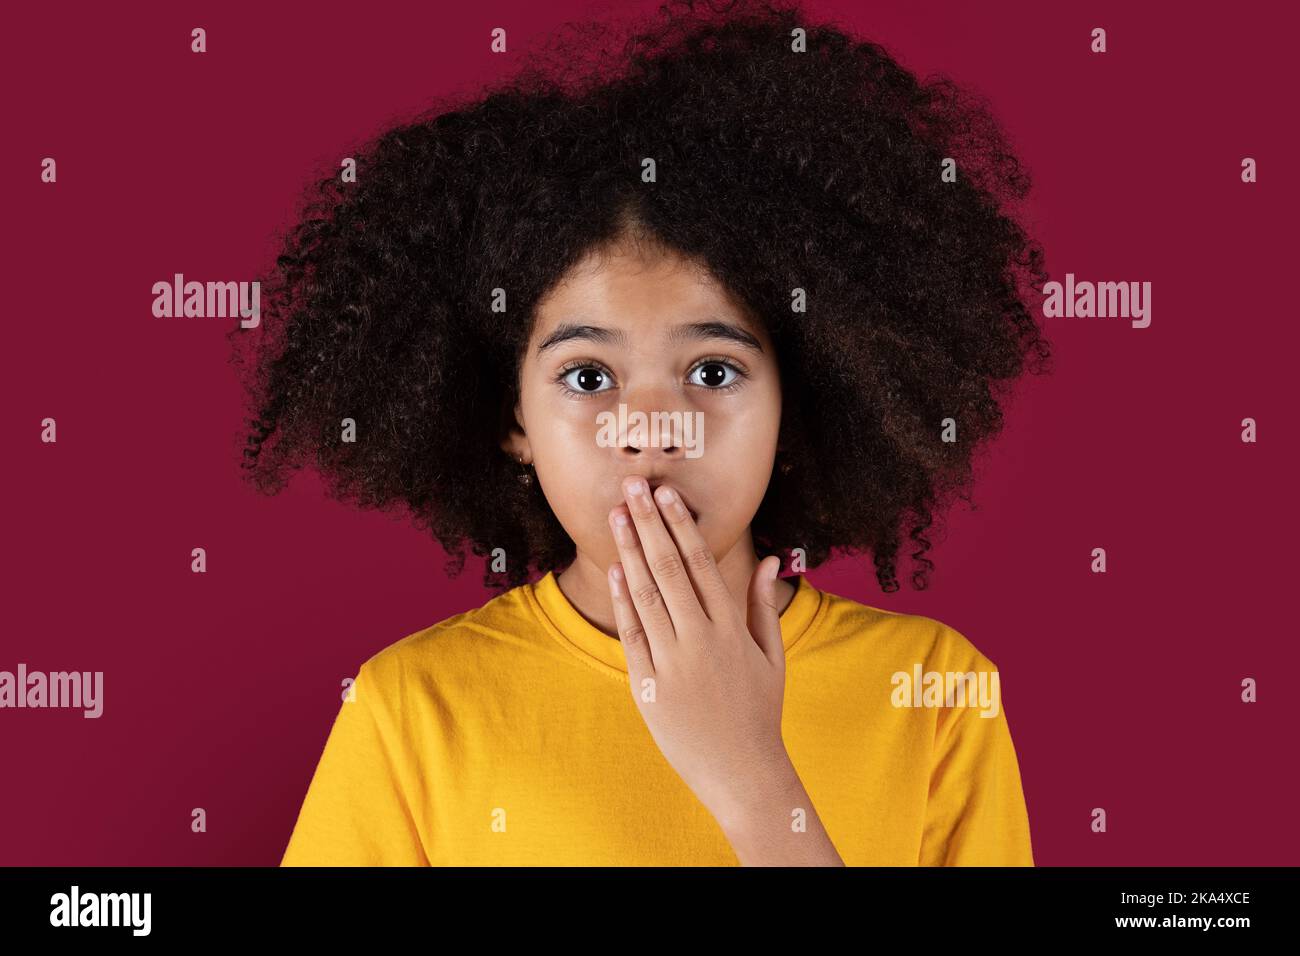 Closeup of shocked african american girl on colorful background Stock Photo